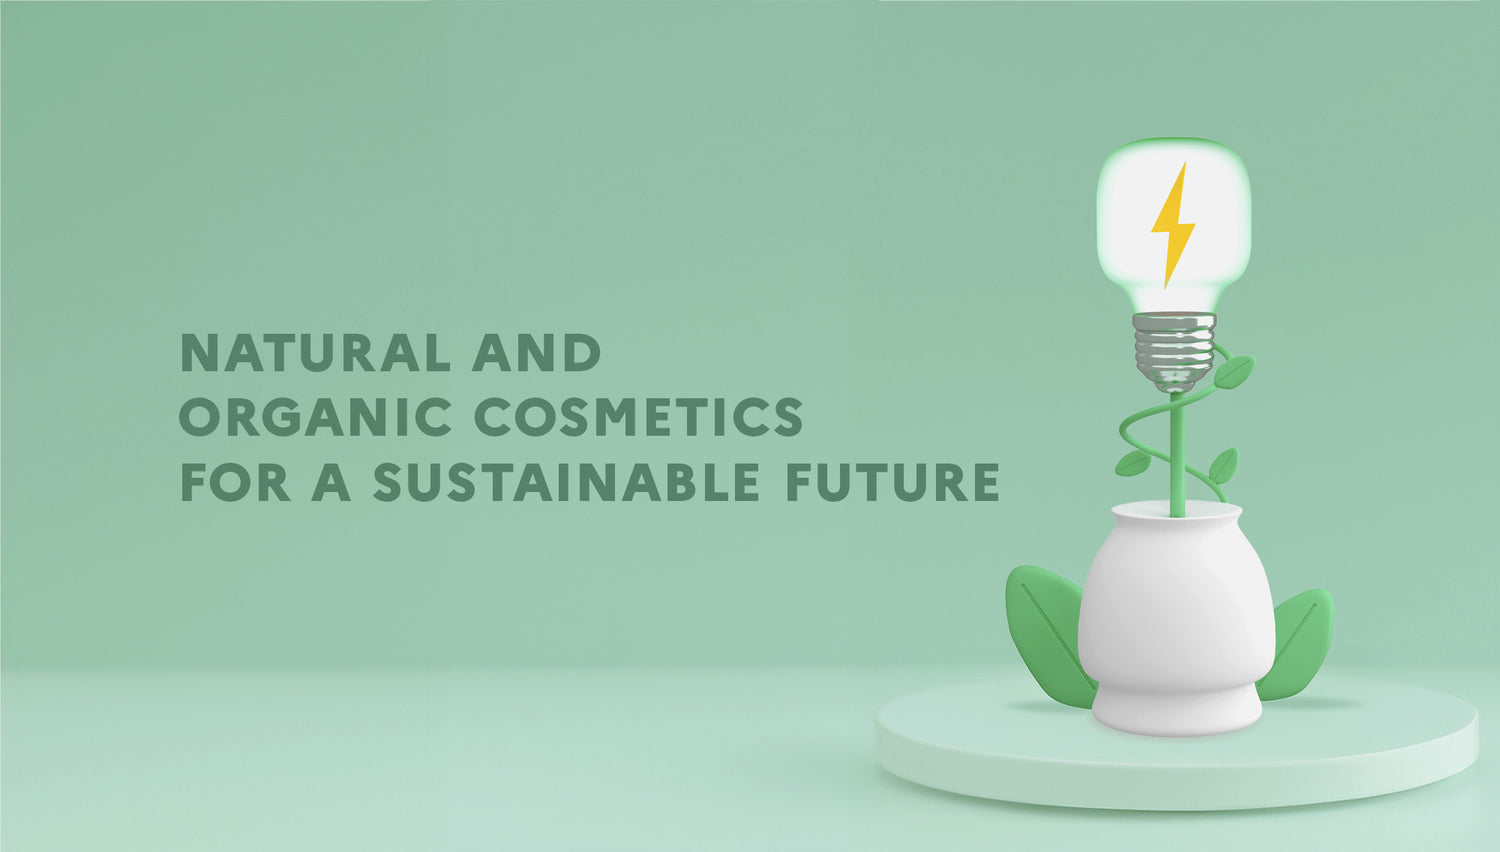 Why choose natural and organic cosmetics for a sustainable future?